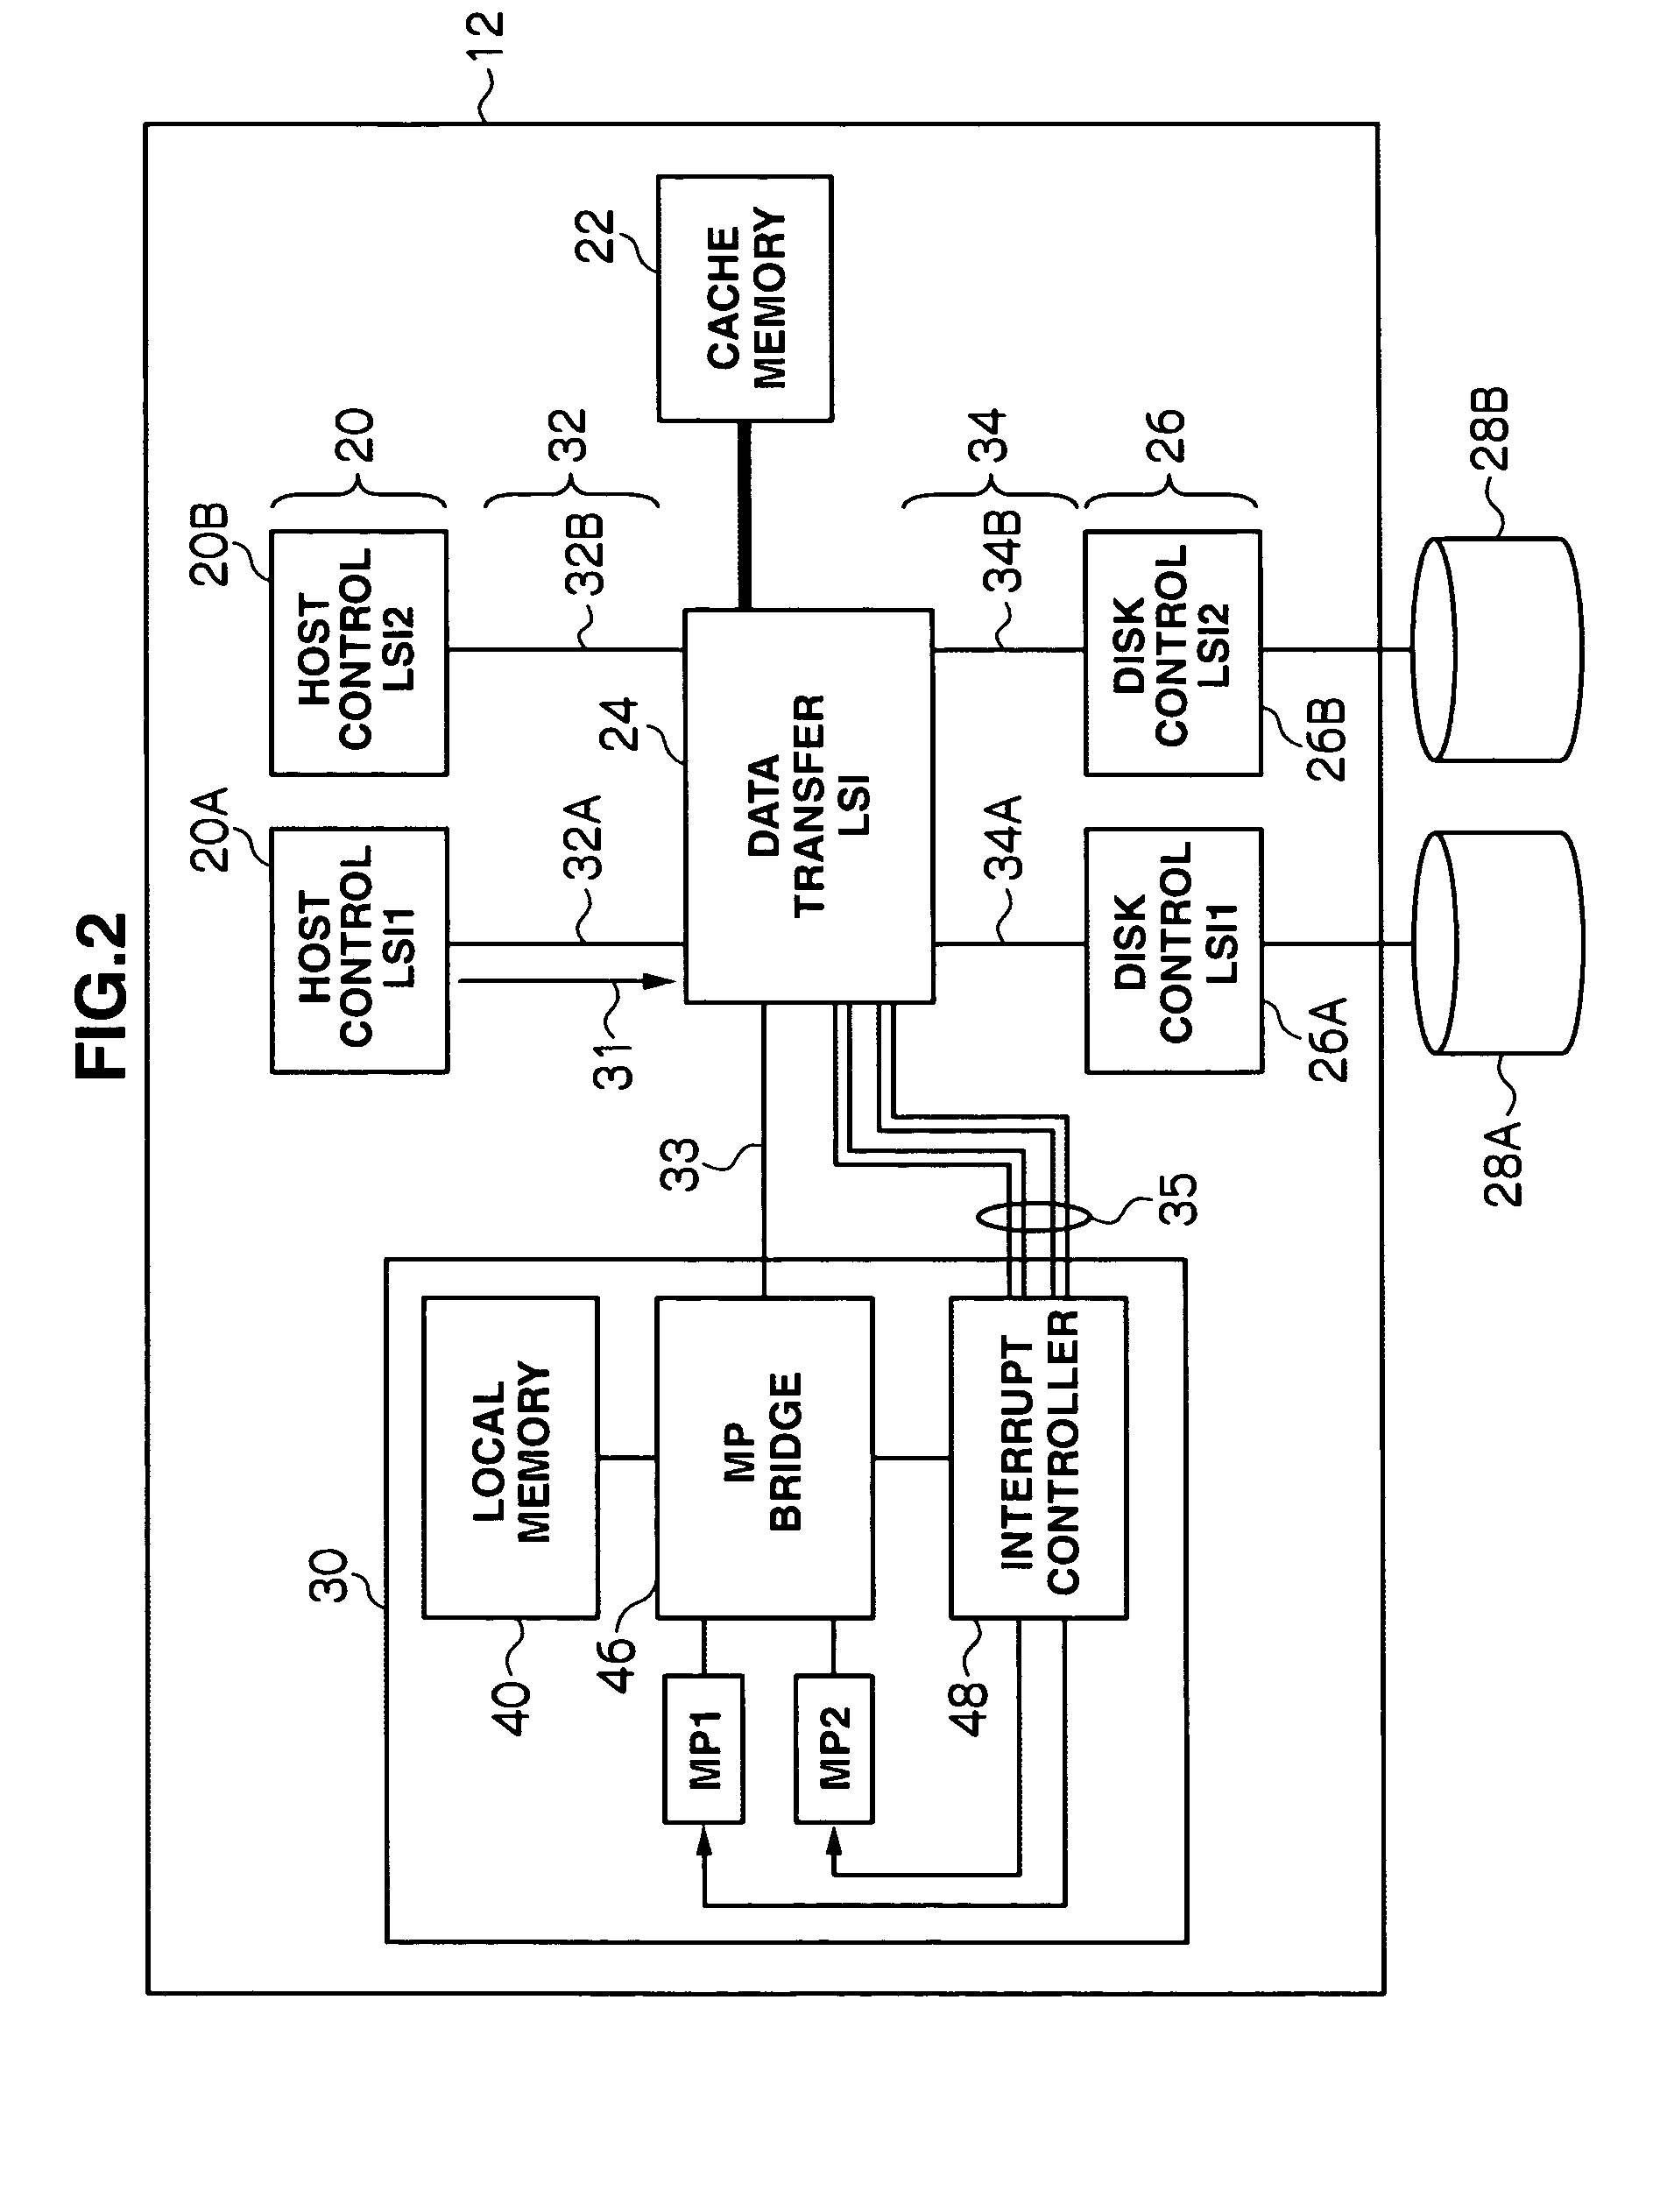 Interrupt control system and storage control system using the same